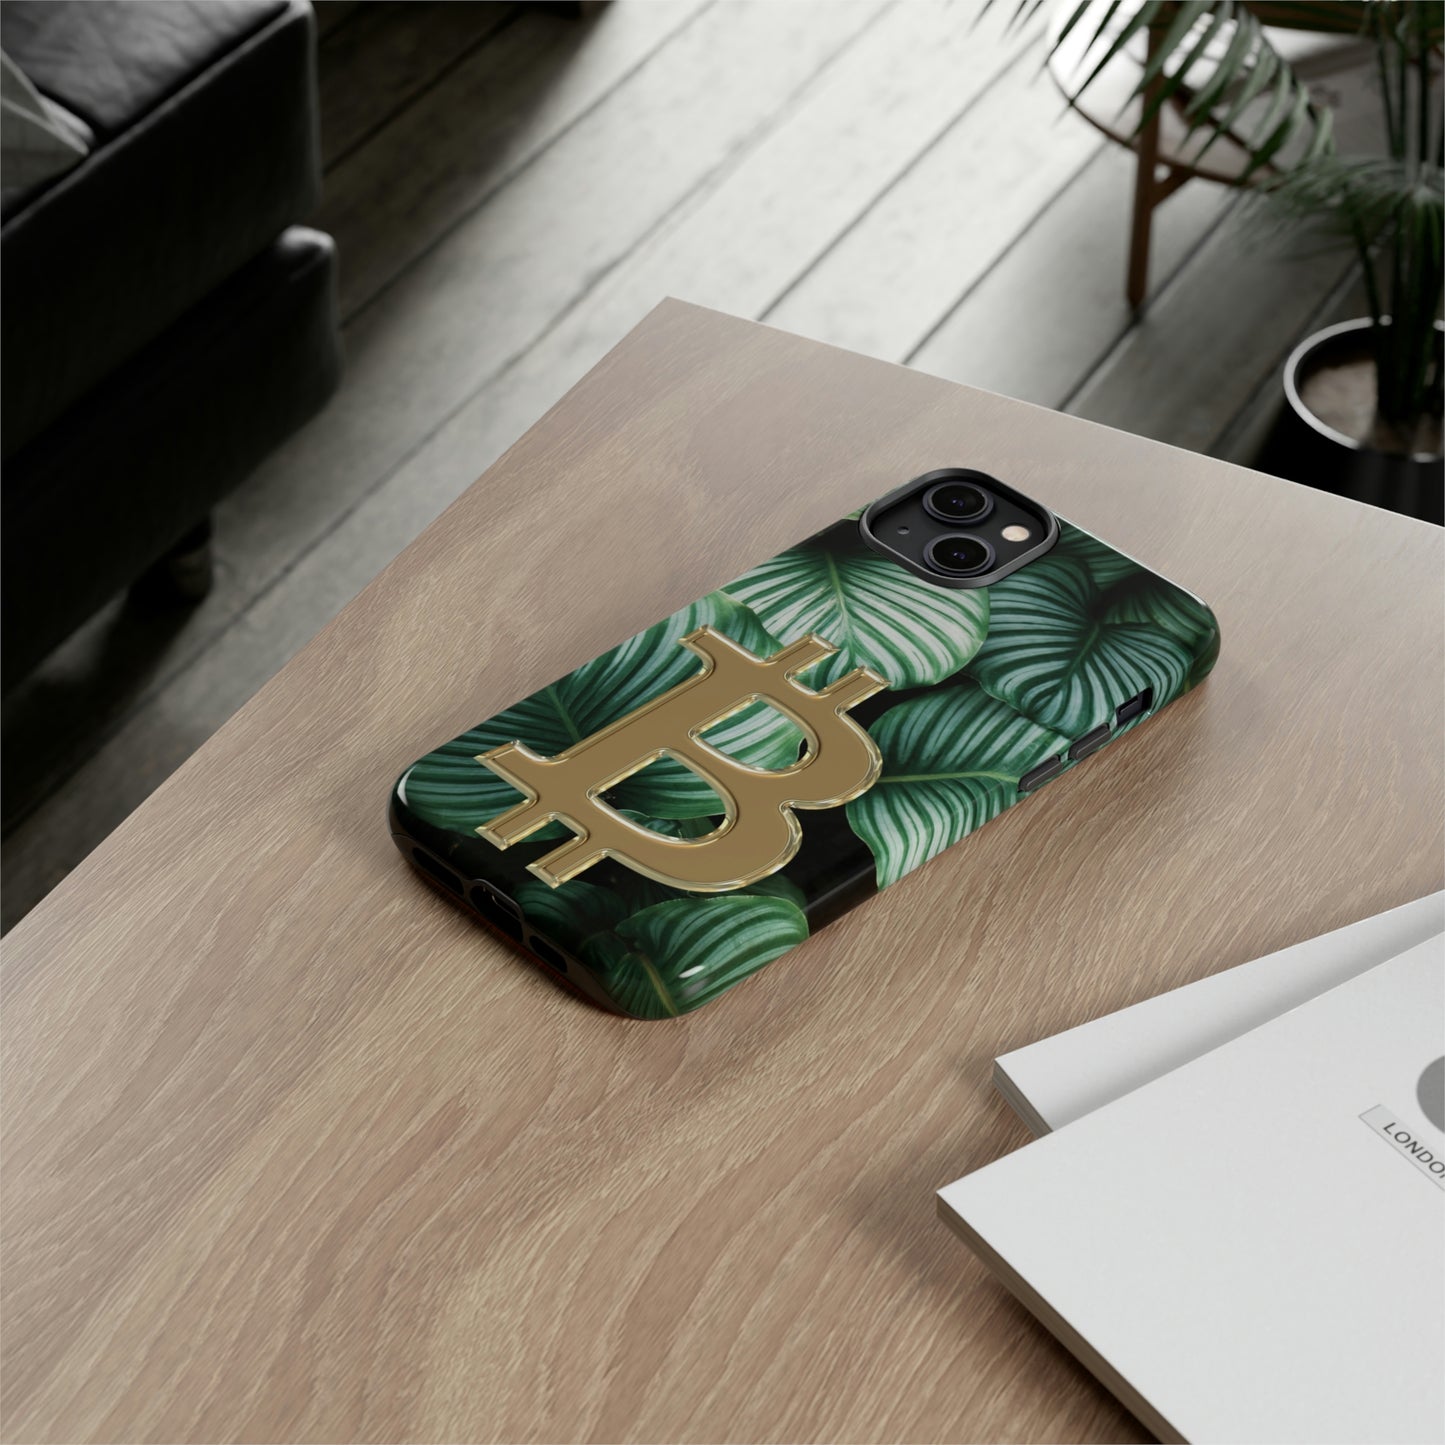 Bitcoin Forest Phone Case